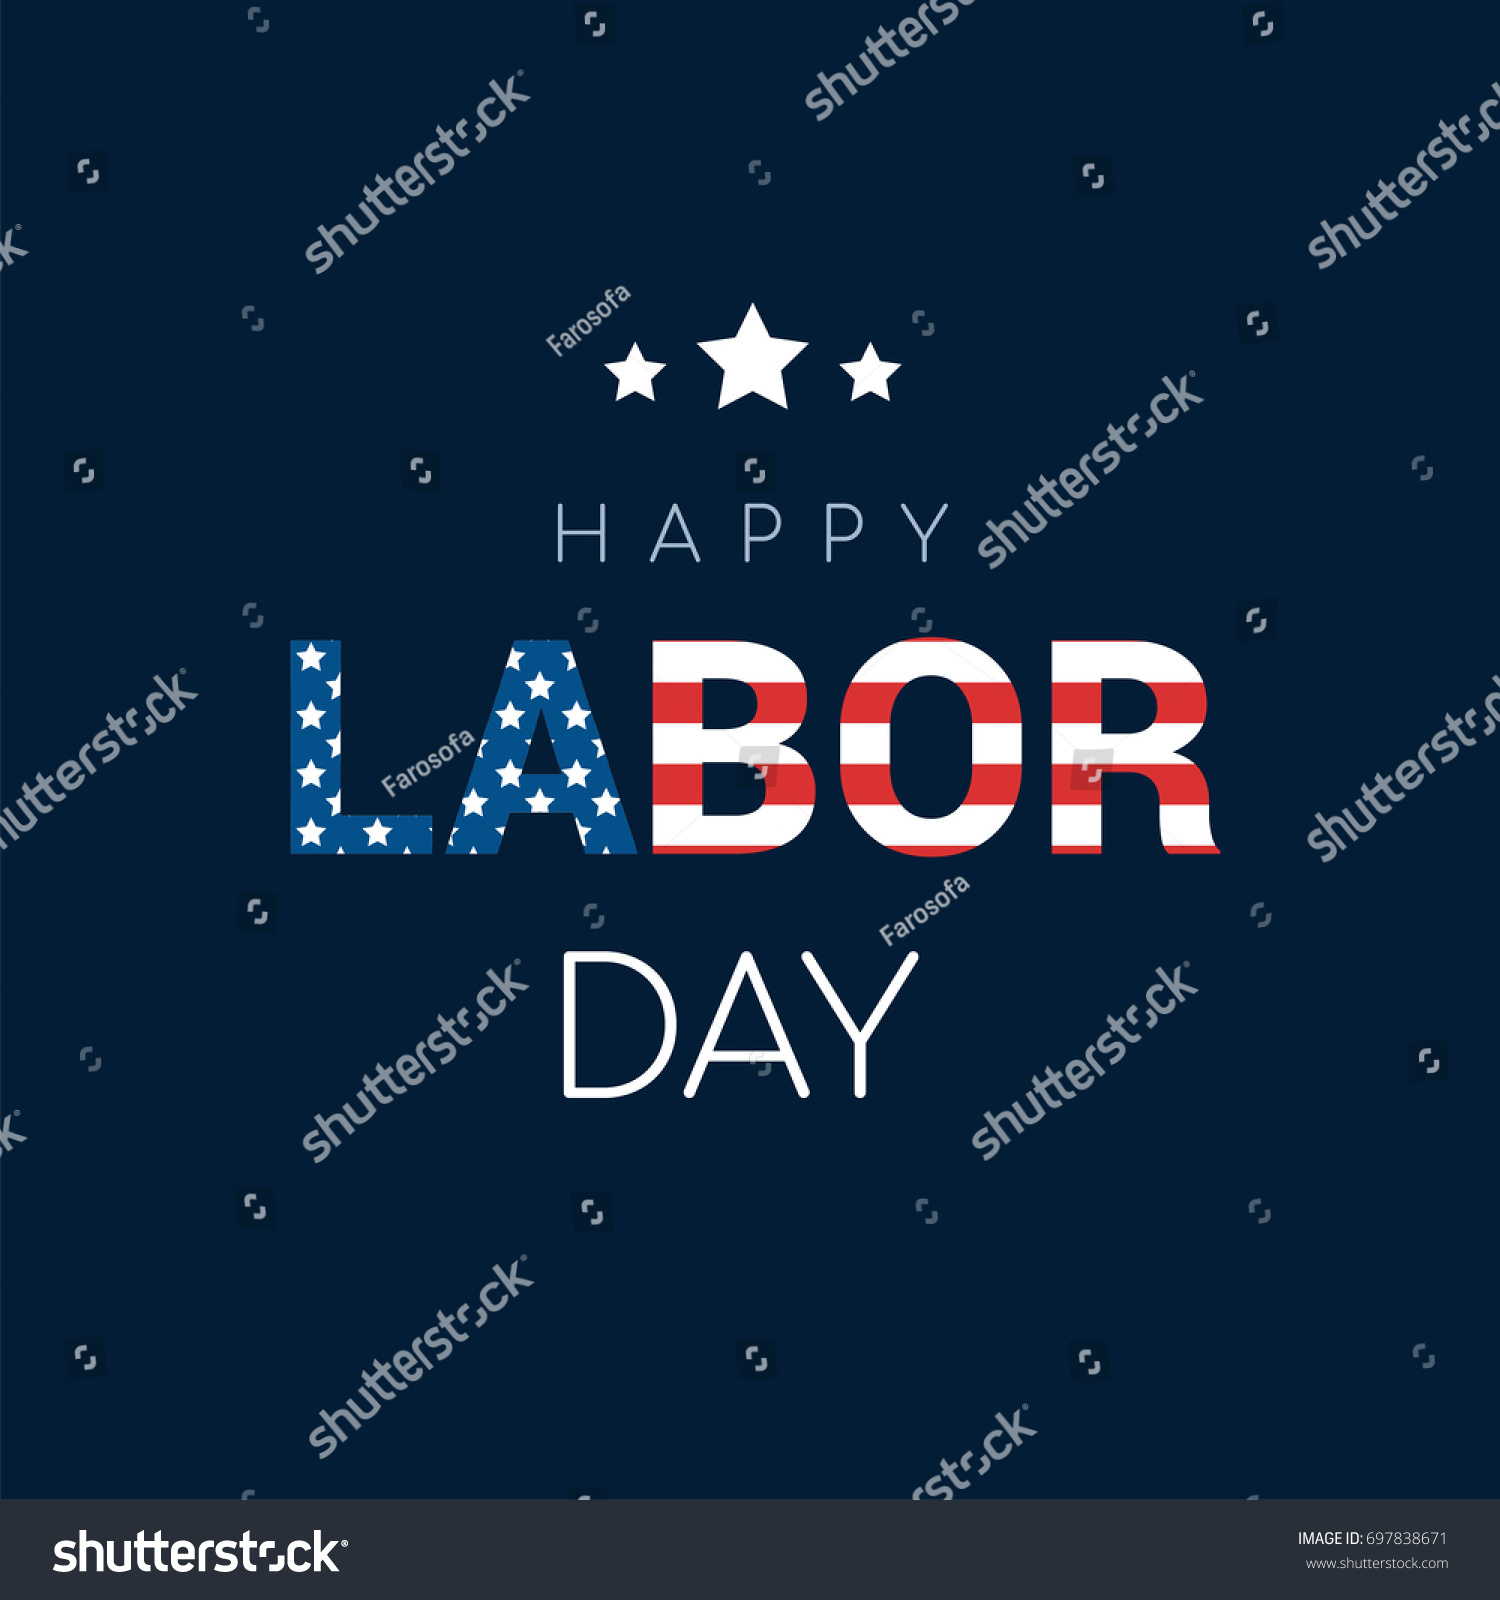 Happy Labor Day Card Vector Illustration Stock Vector (Royalty Free ...